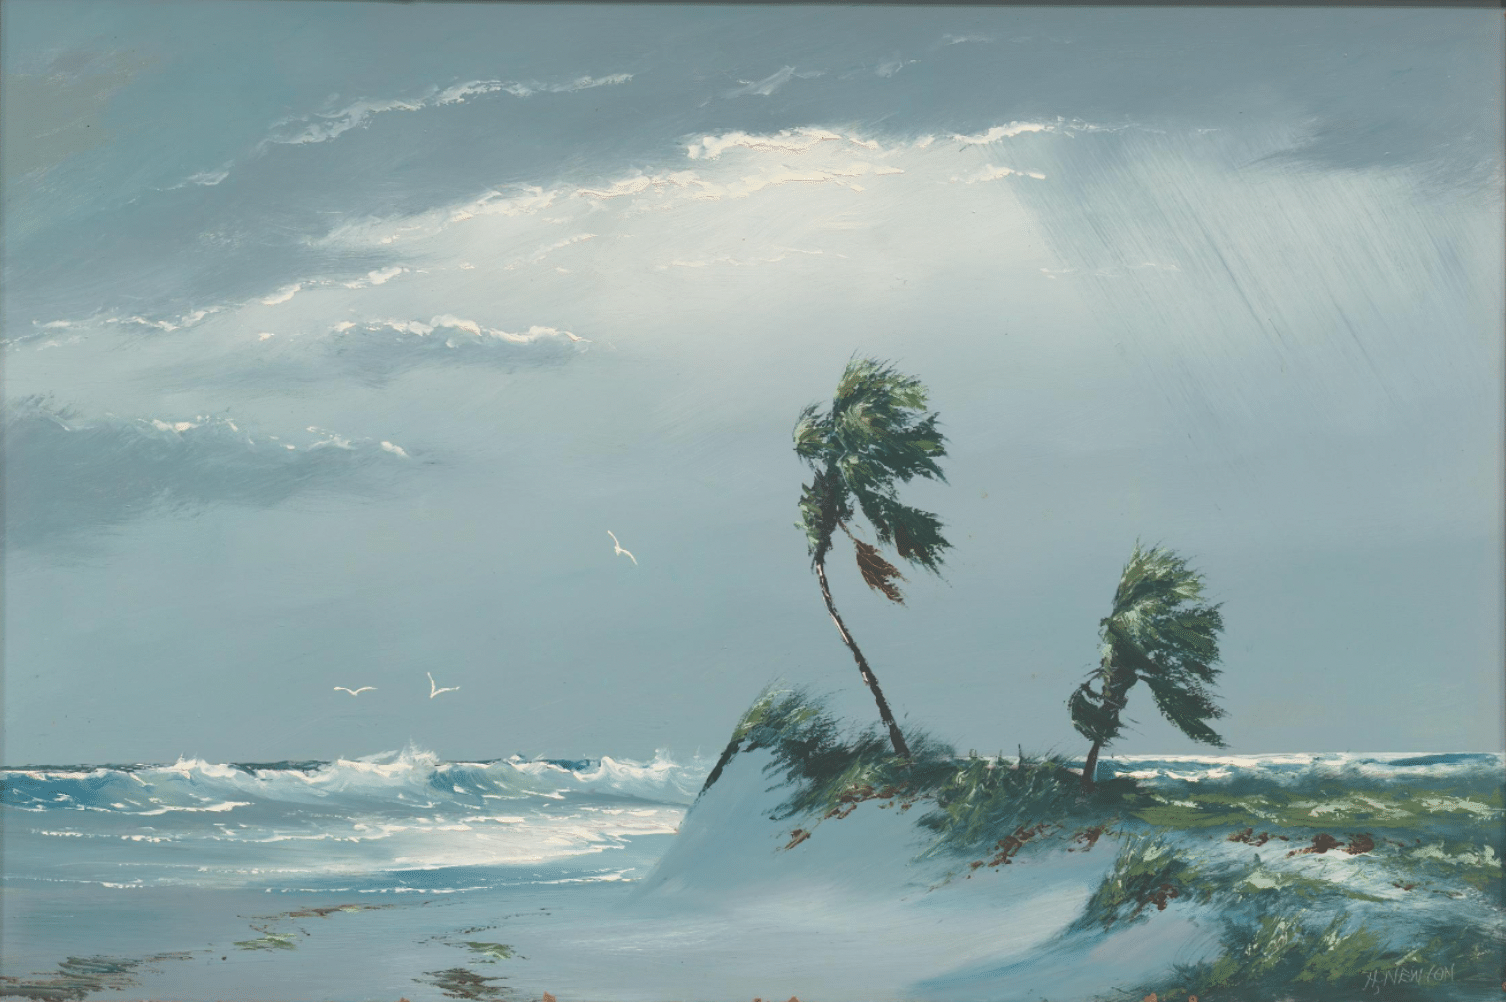 Rough Sea, Palms on Sand Dune by Harold Newton (1934 – 1994), ca. 1984, Smithsonian Museum